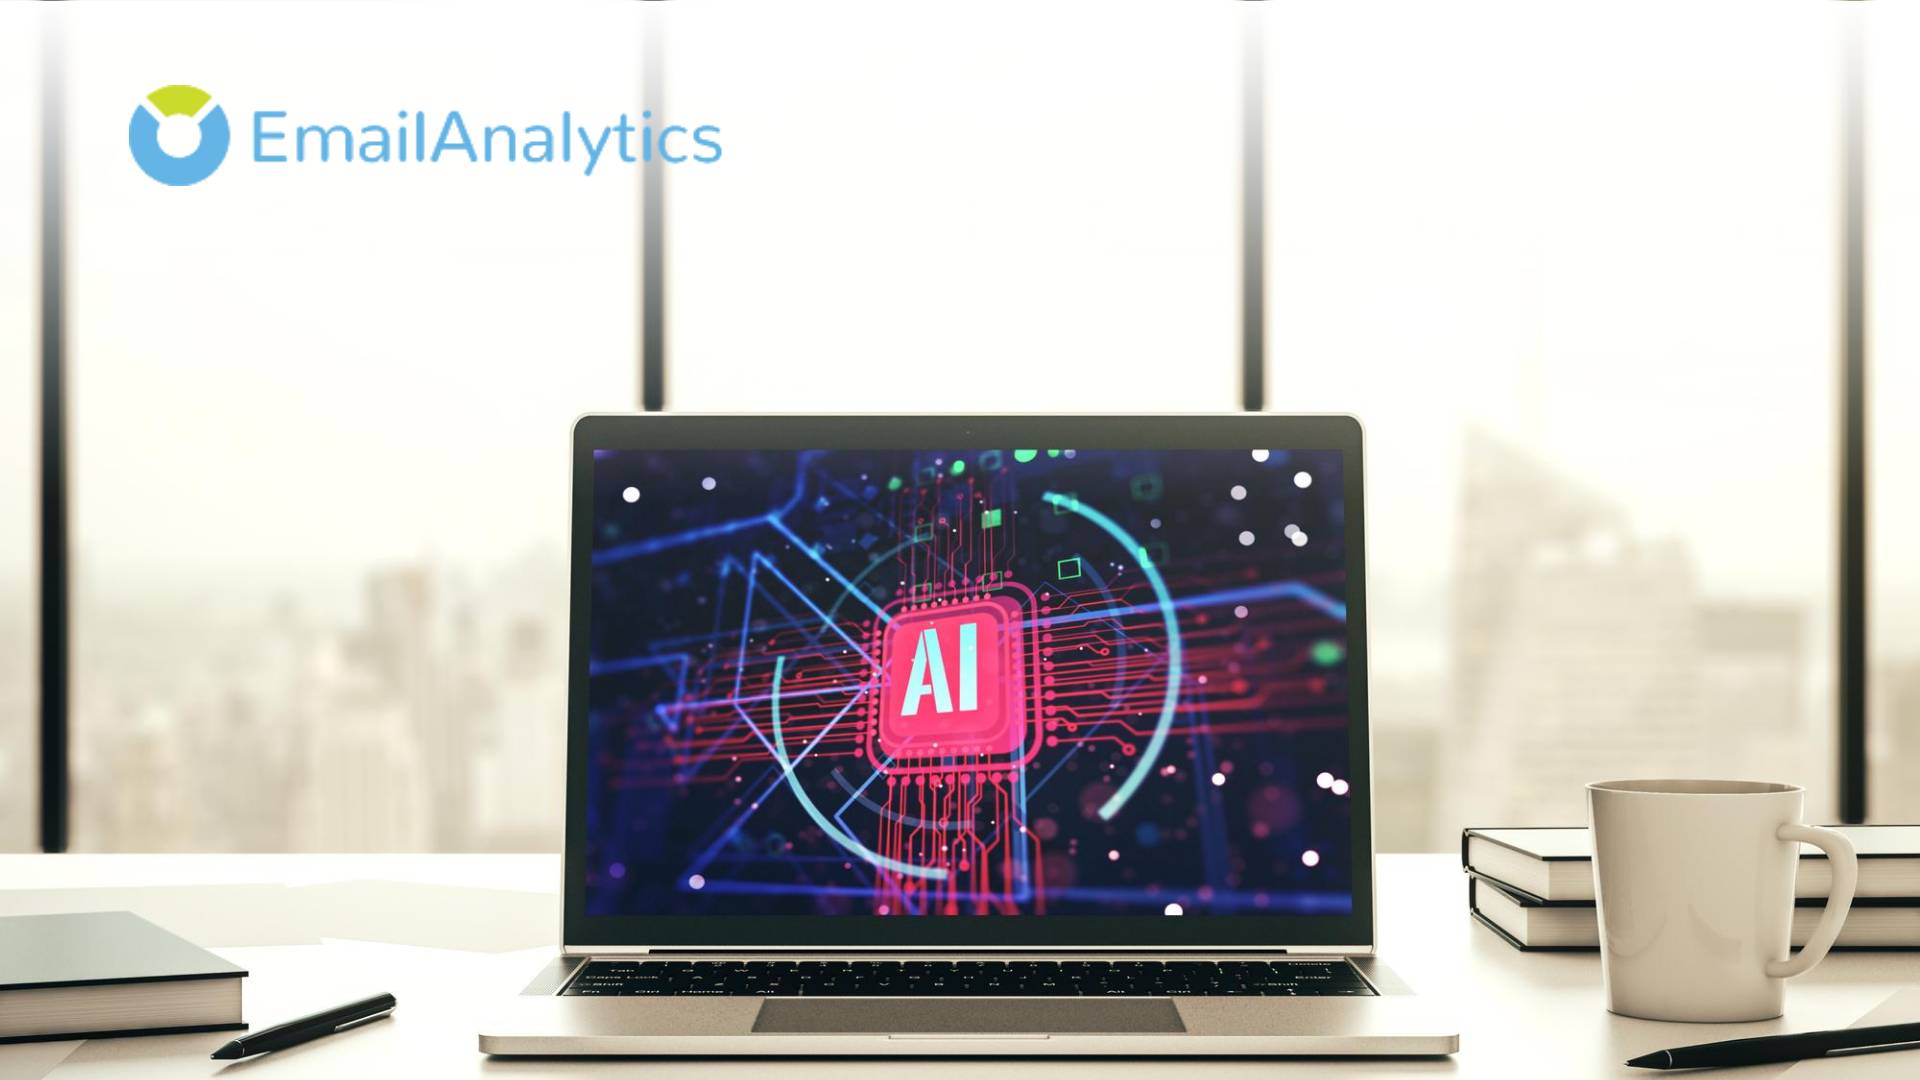 EmailAnalytics Launches AI Insights for Enhanced Email Response Management